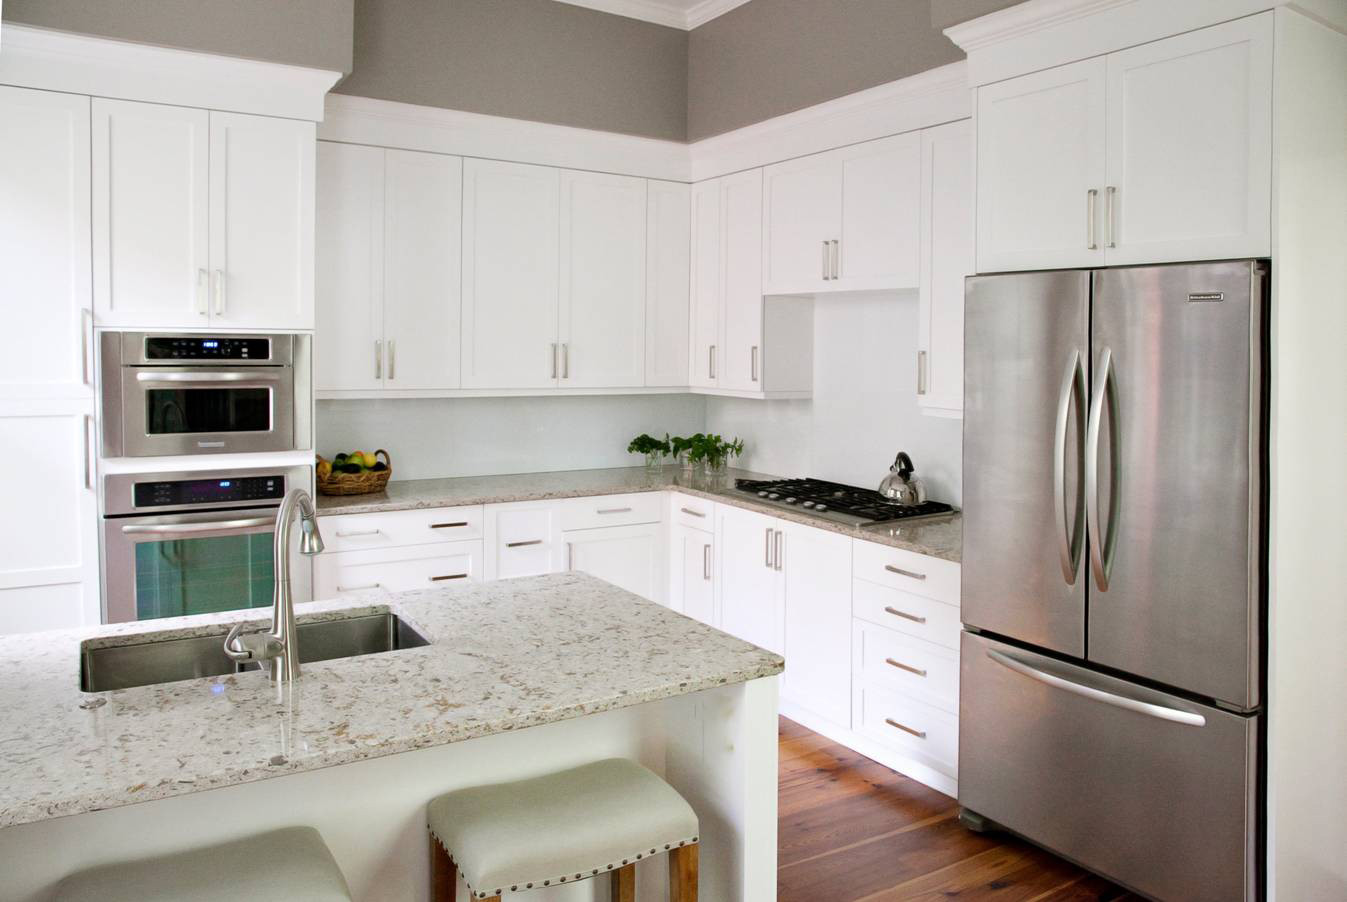 Repainting Kitchen Cabinets White
 Most Popular Kitchen Cabinet Colors in 2019